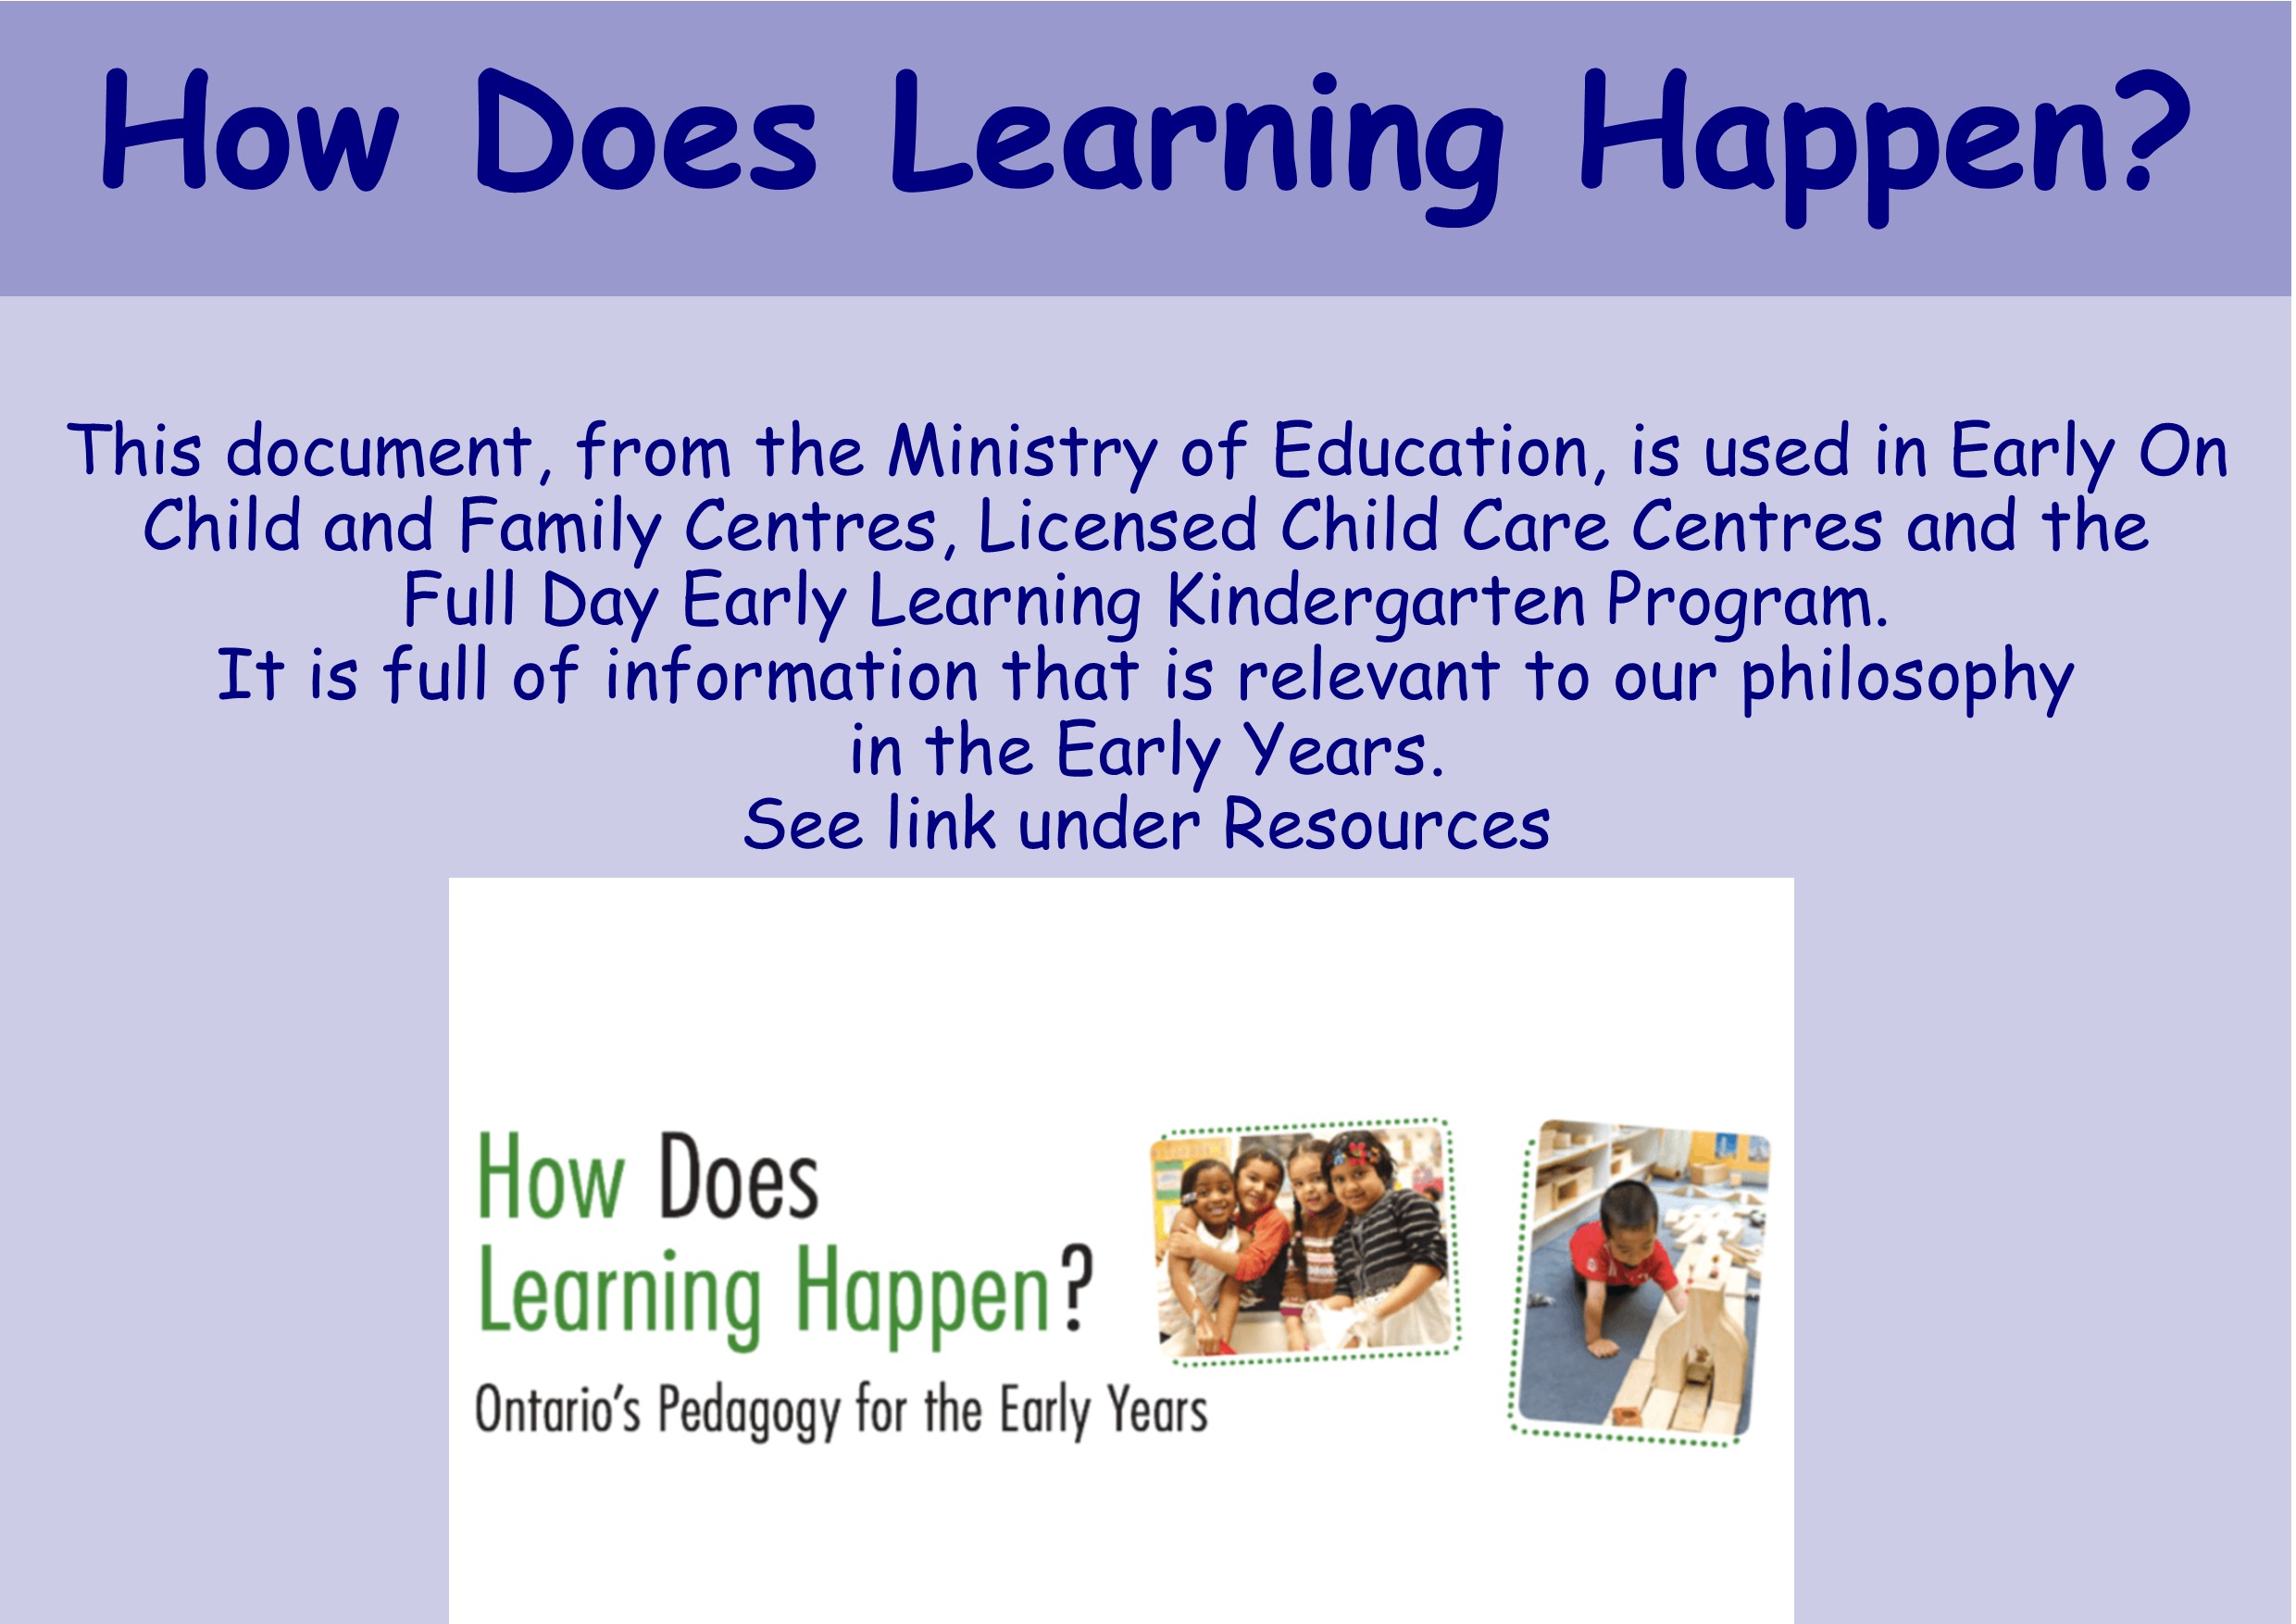 How does Learning Happen?